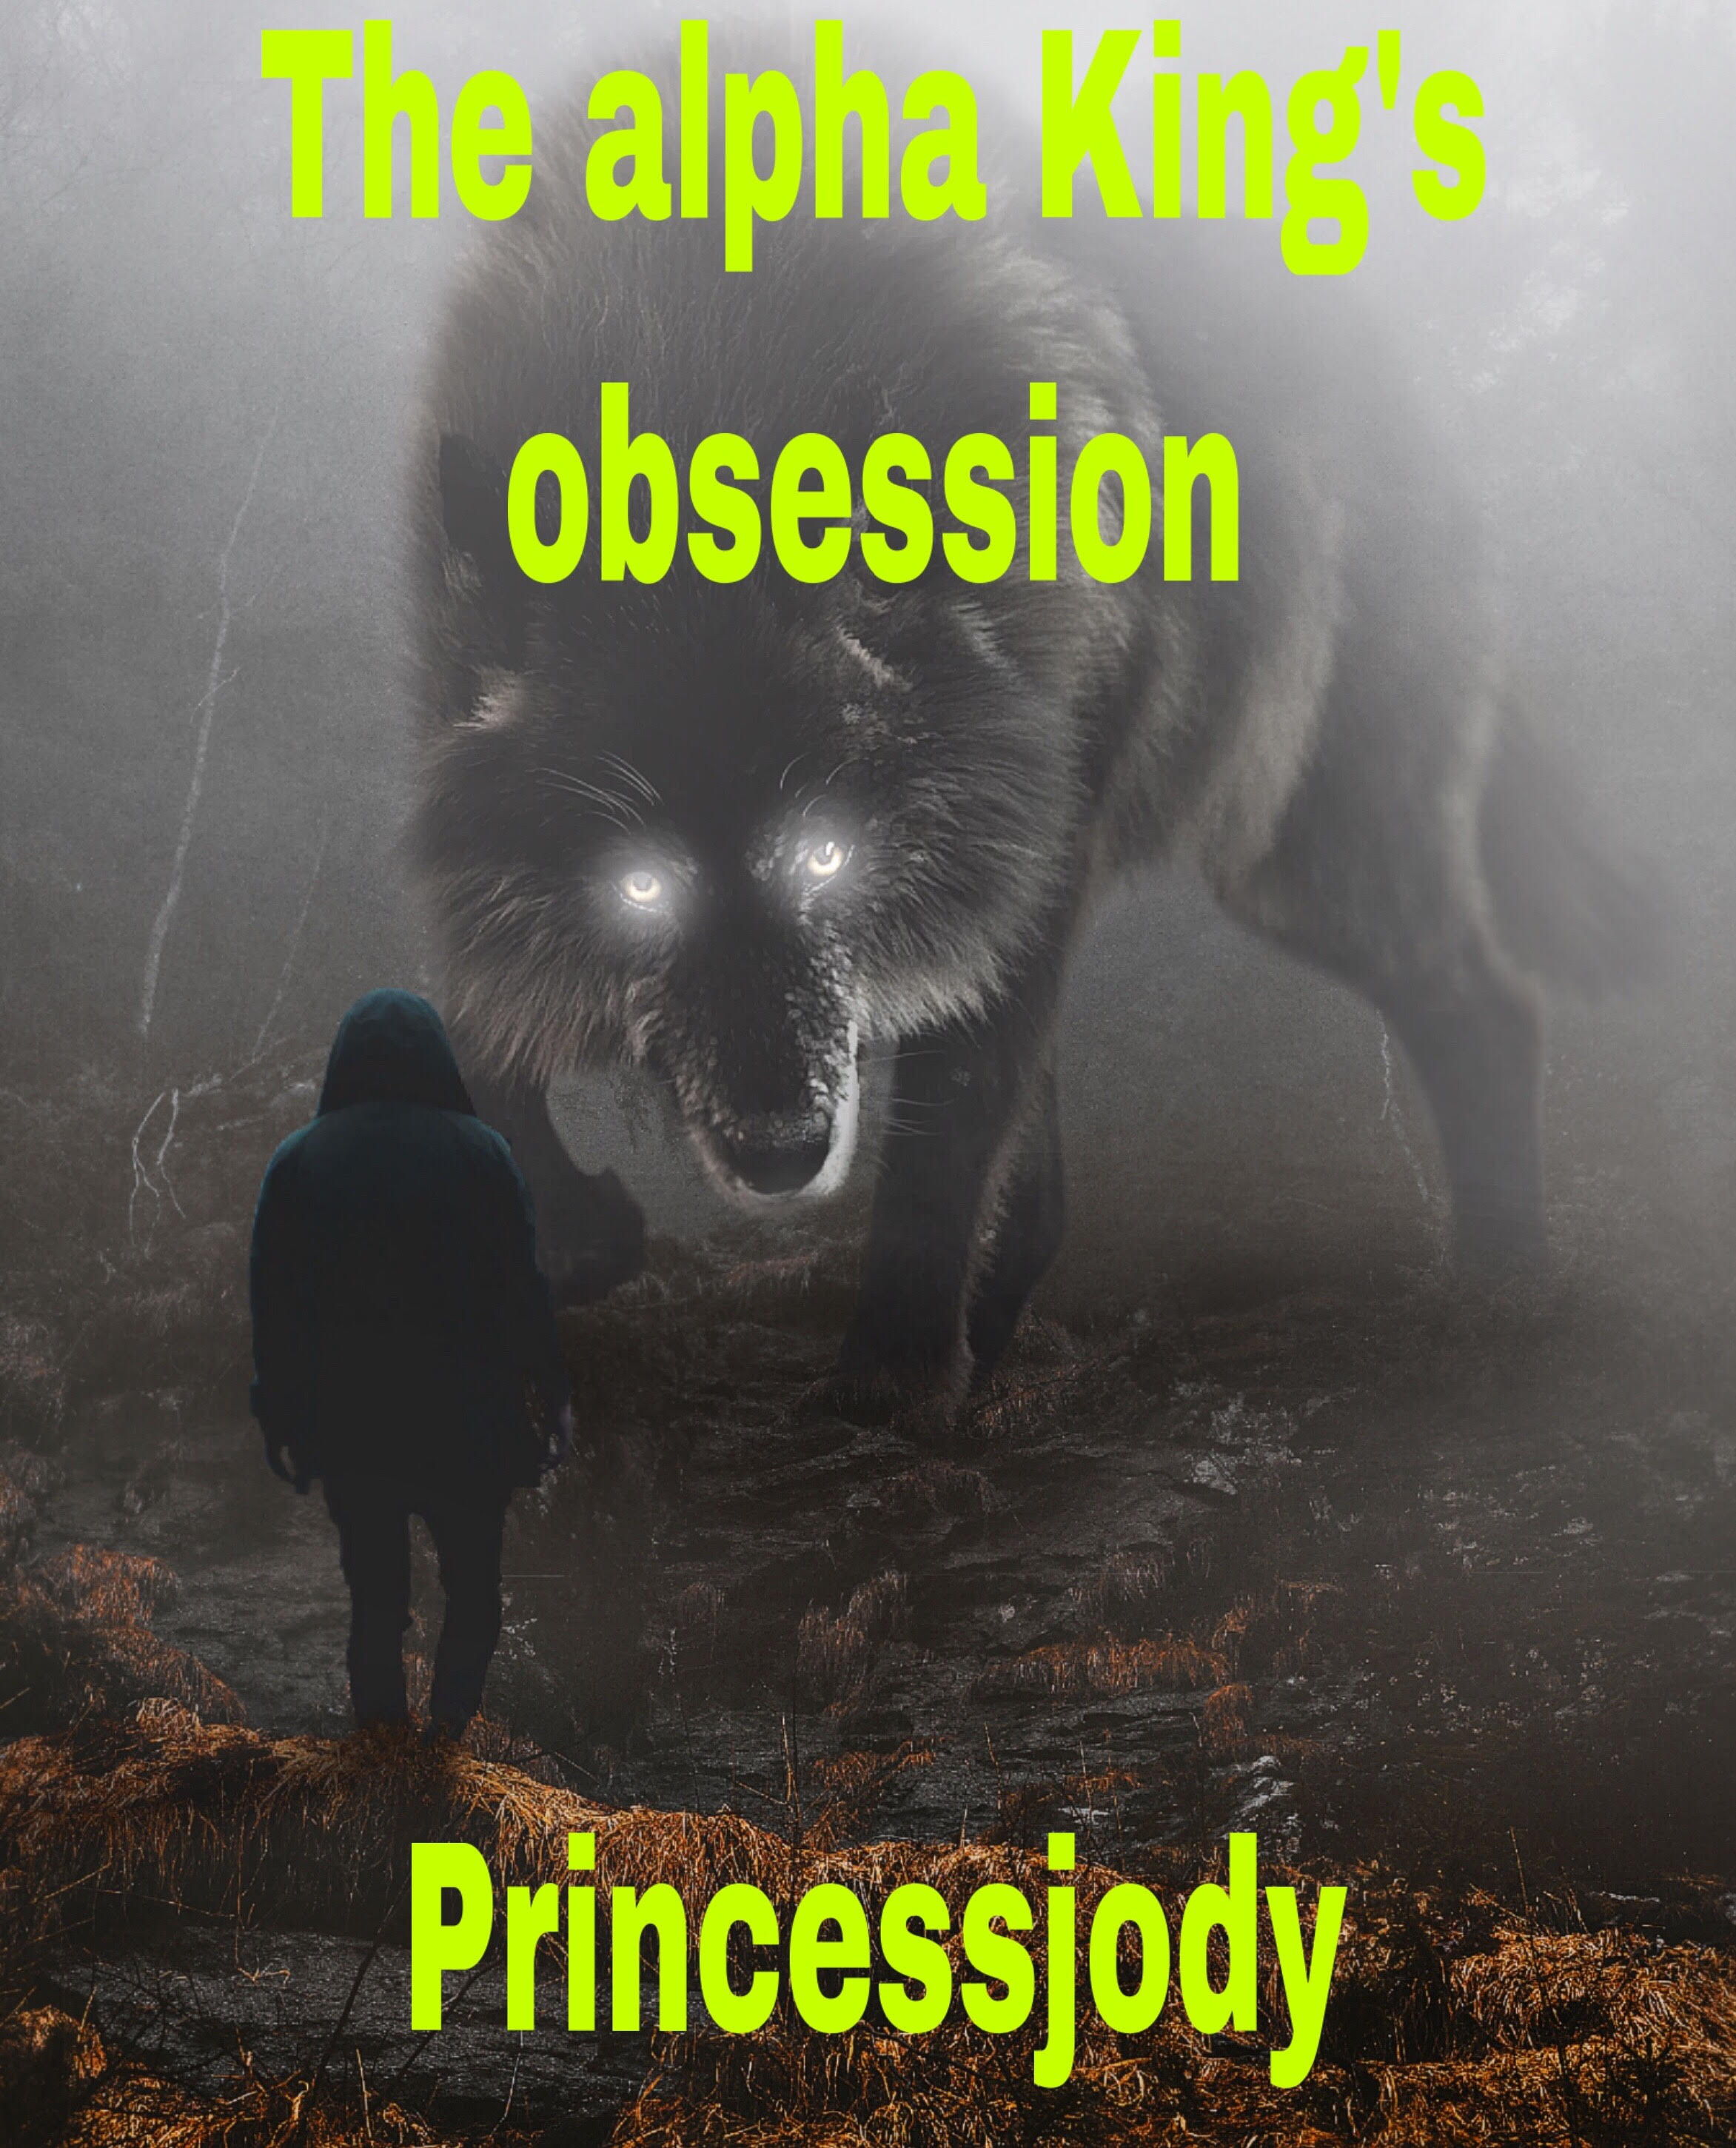 The alpha king Obsession By Princessjody | Libri